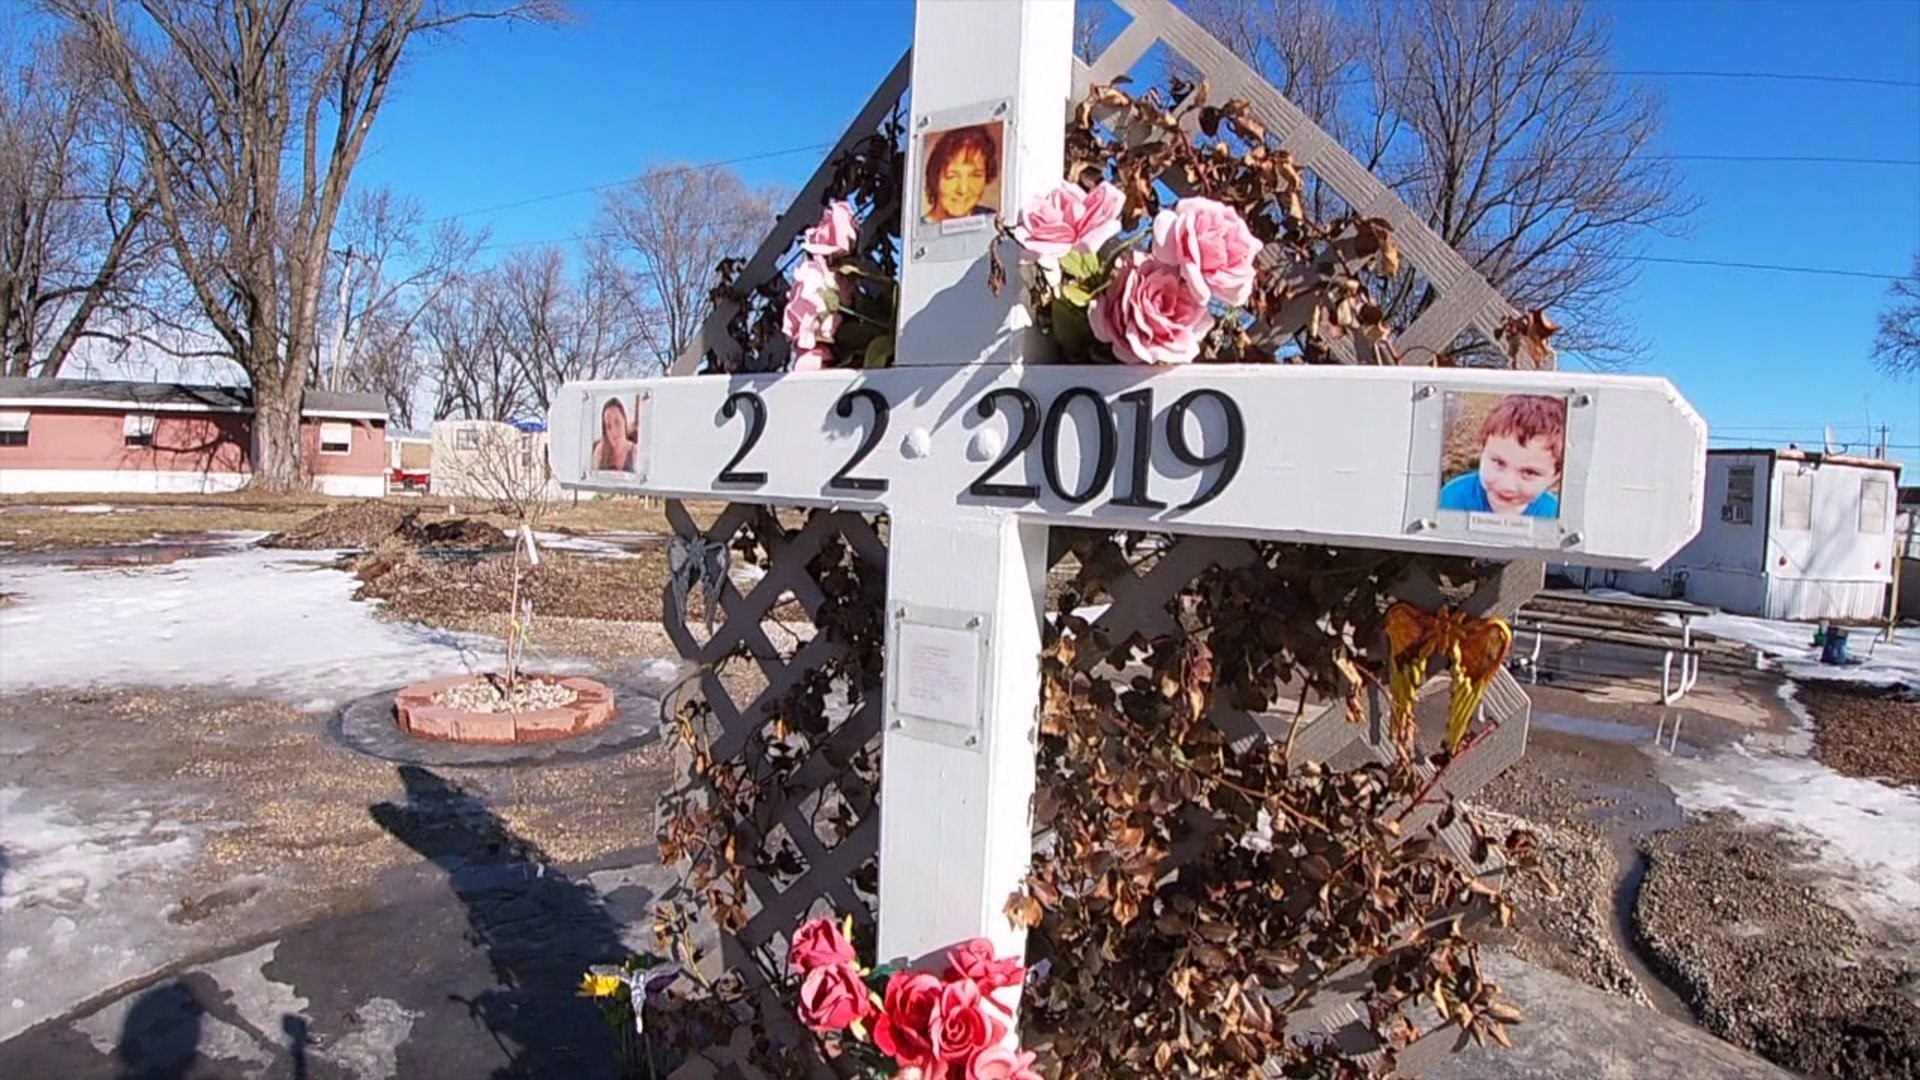 A memorial is built after three generations were killed in a mobile home fire